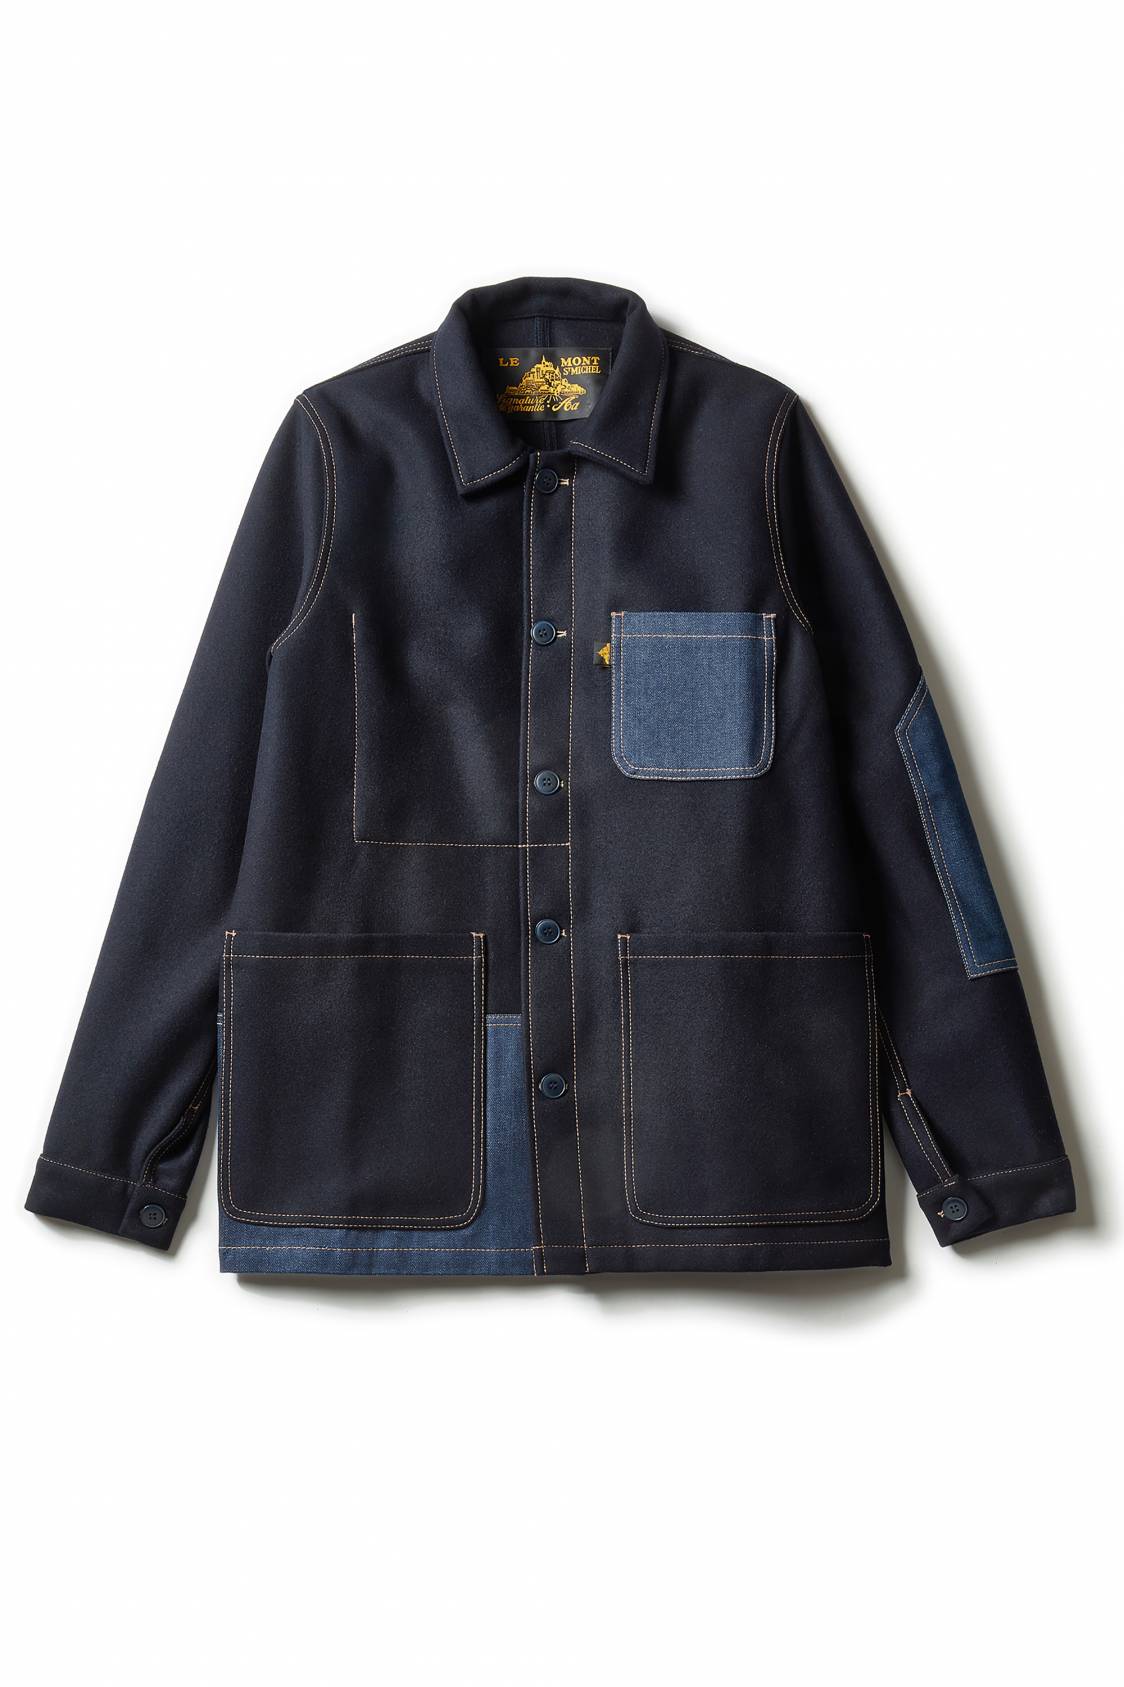 Work Jacket with contrasting patches - LE MONT SAINT MICHEL